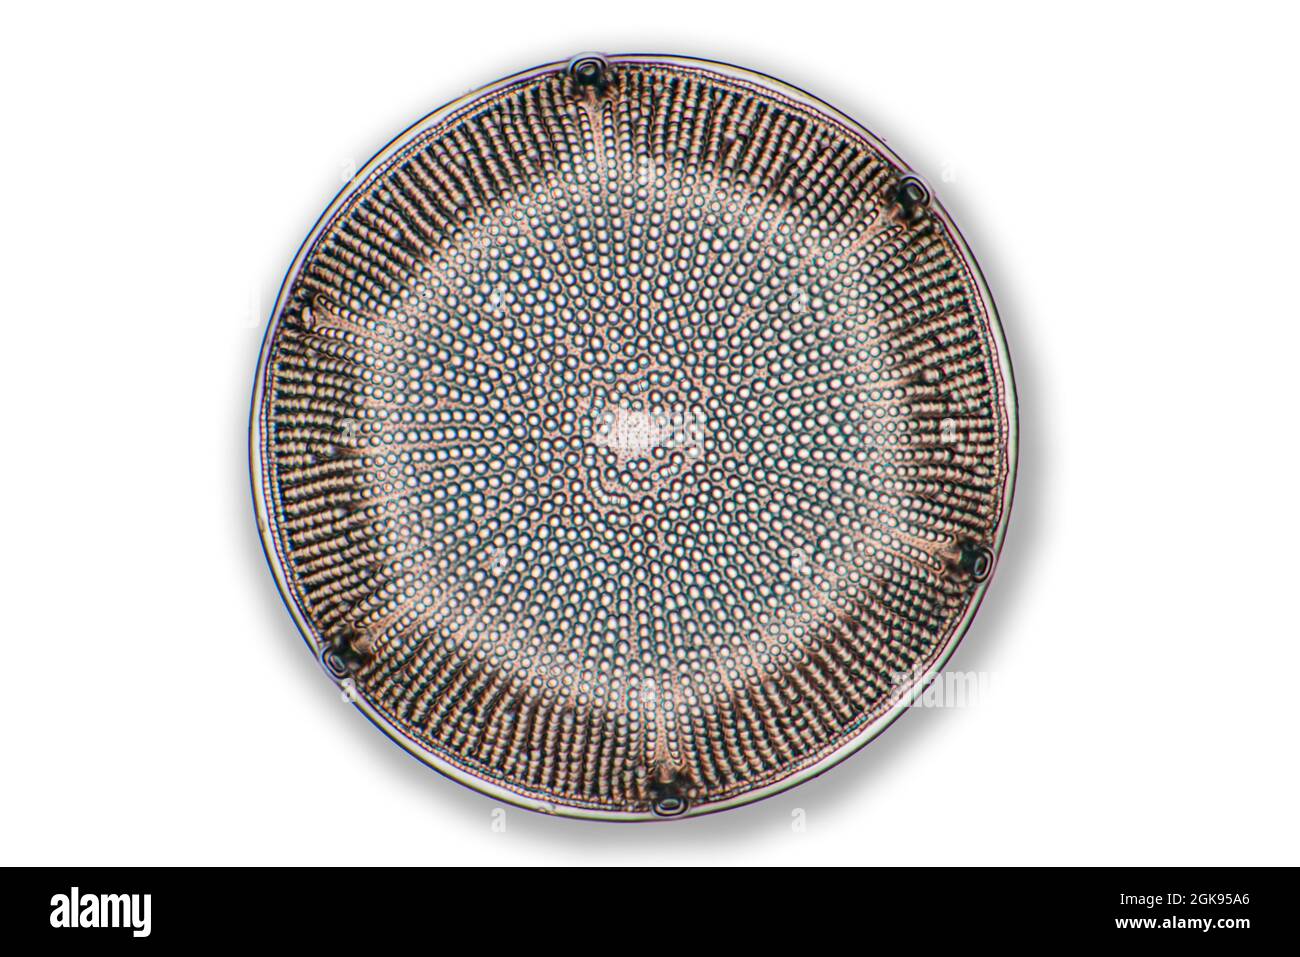 diatom (Diatomeae), Diatoms from Dunkirk, light microscopy, magnification x 140 related to a print of 35 mm width, France Stock Photo